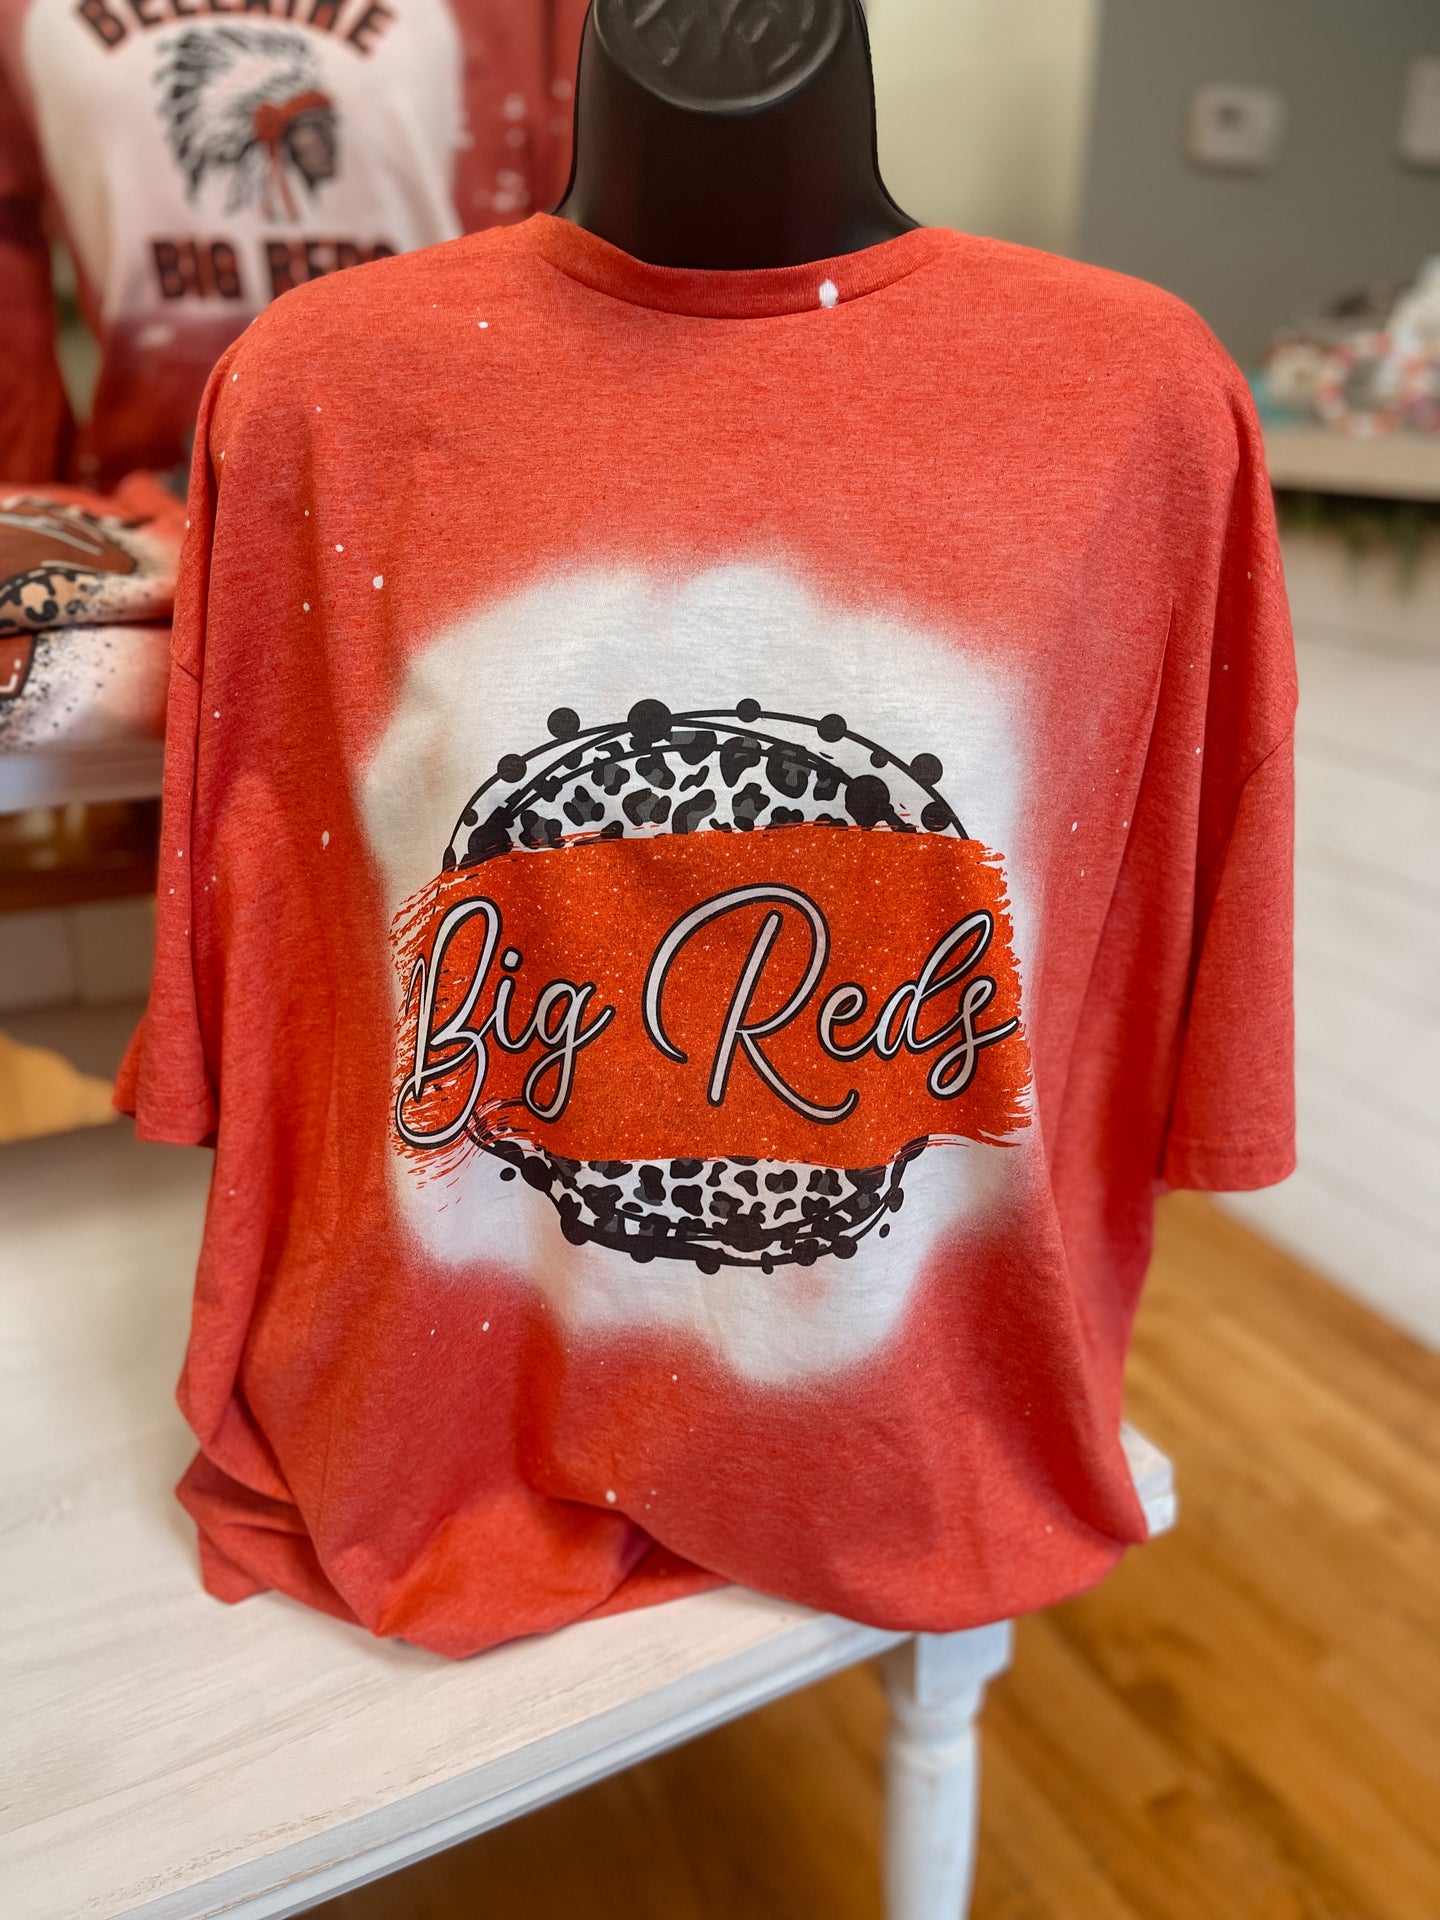 Big Reds Tee only large